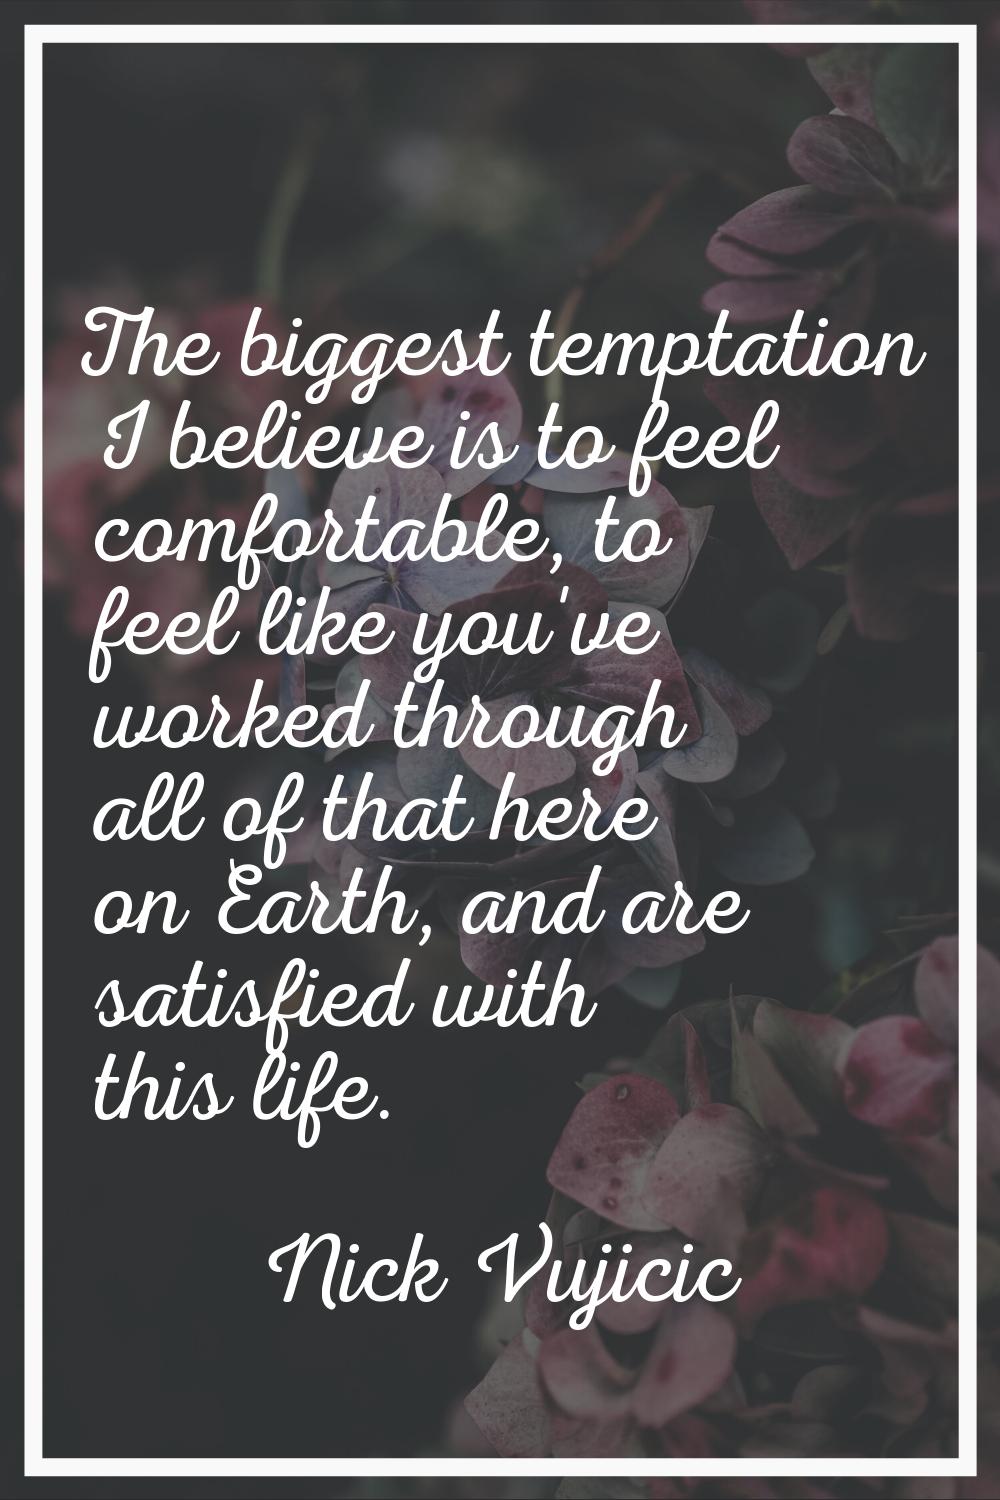 The biggest temptation I believe is to feel comfortable, to feel like you've worked through all of 